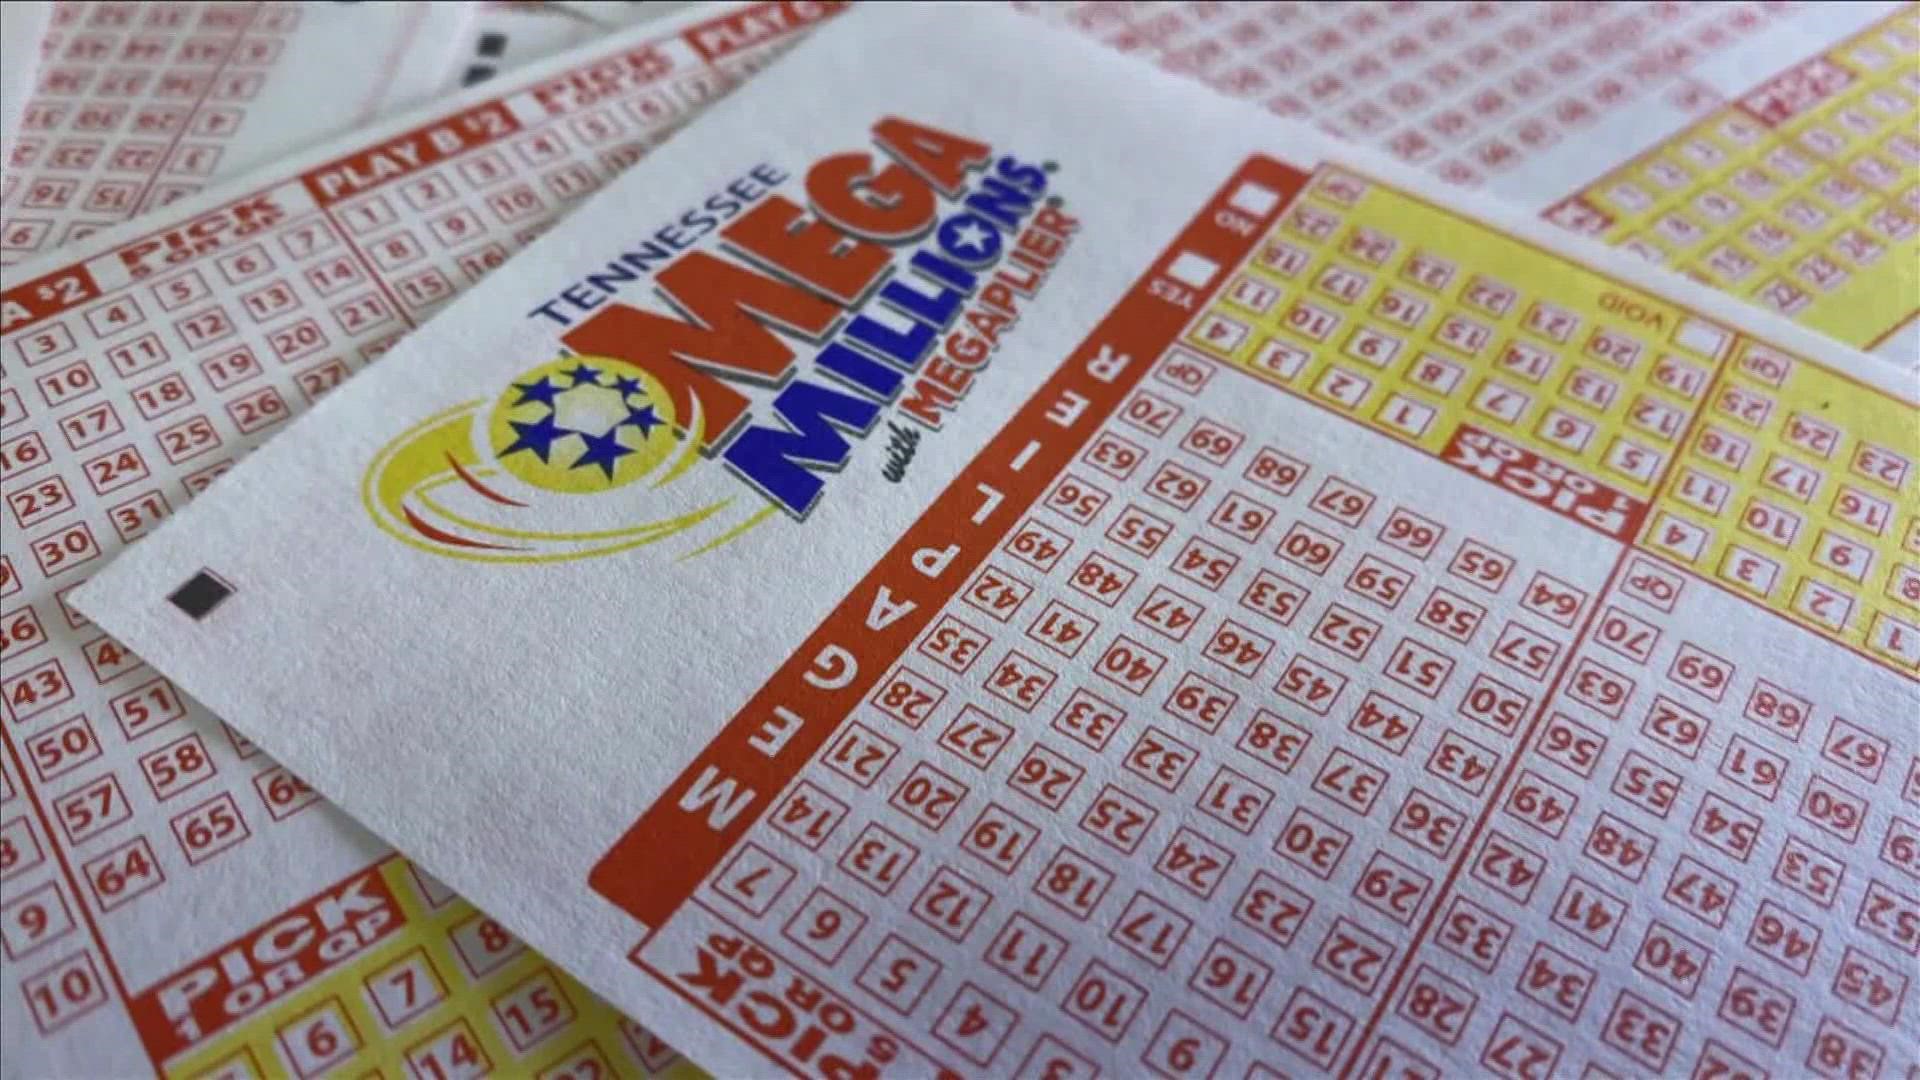 Players have until 9:45 p.m. CT on Jan. 6, 2023, to purchase a ticket for this latest big Mega Millions drawing.